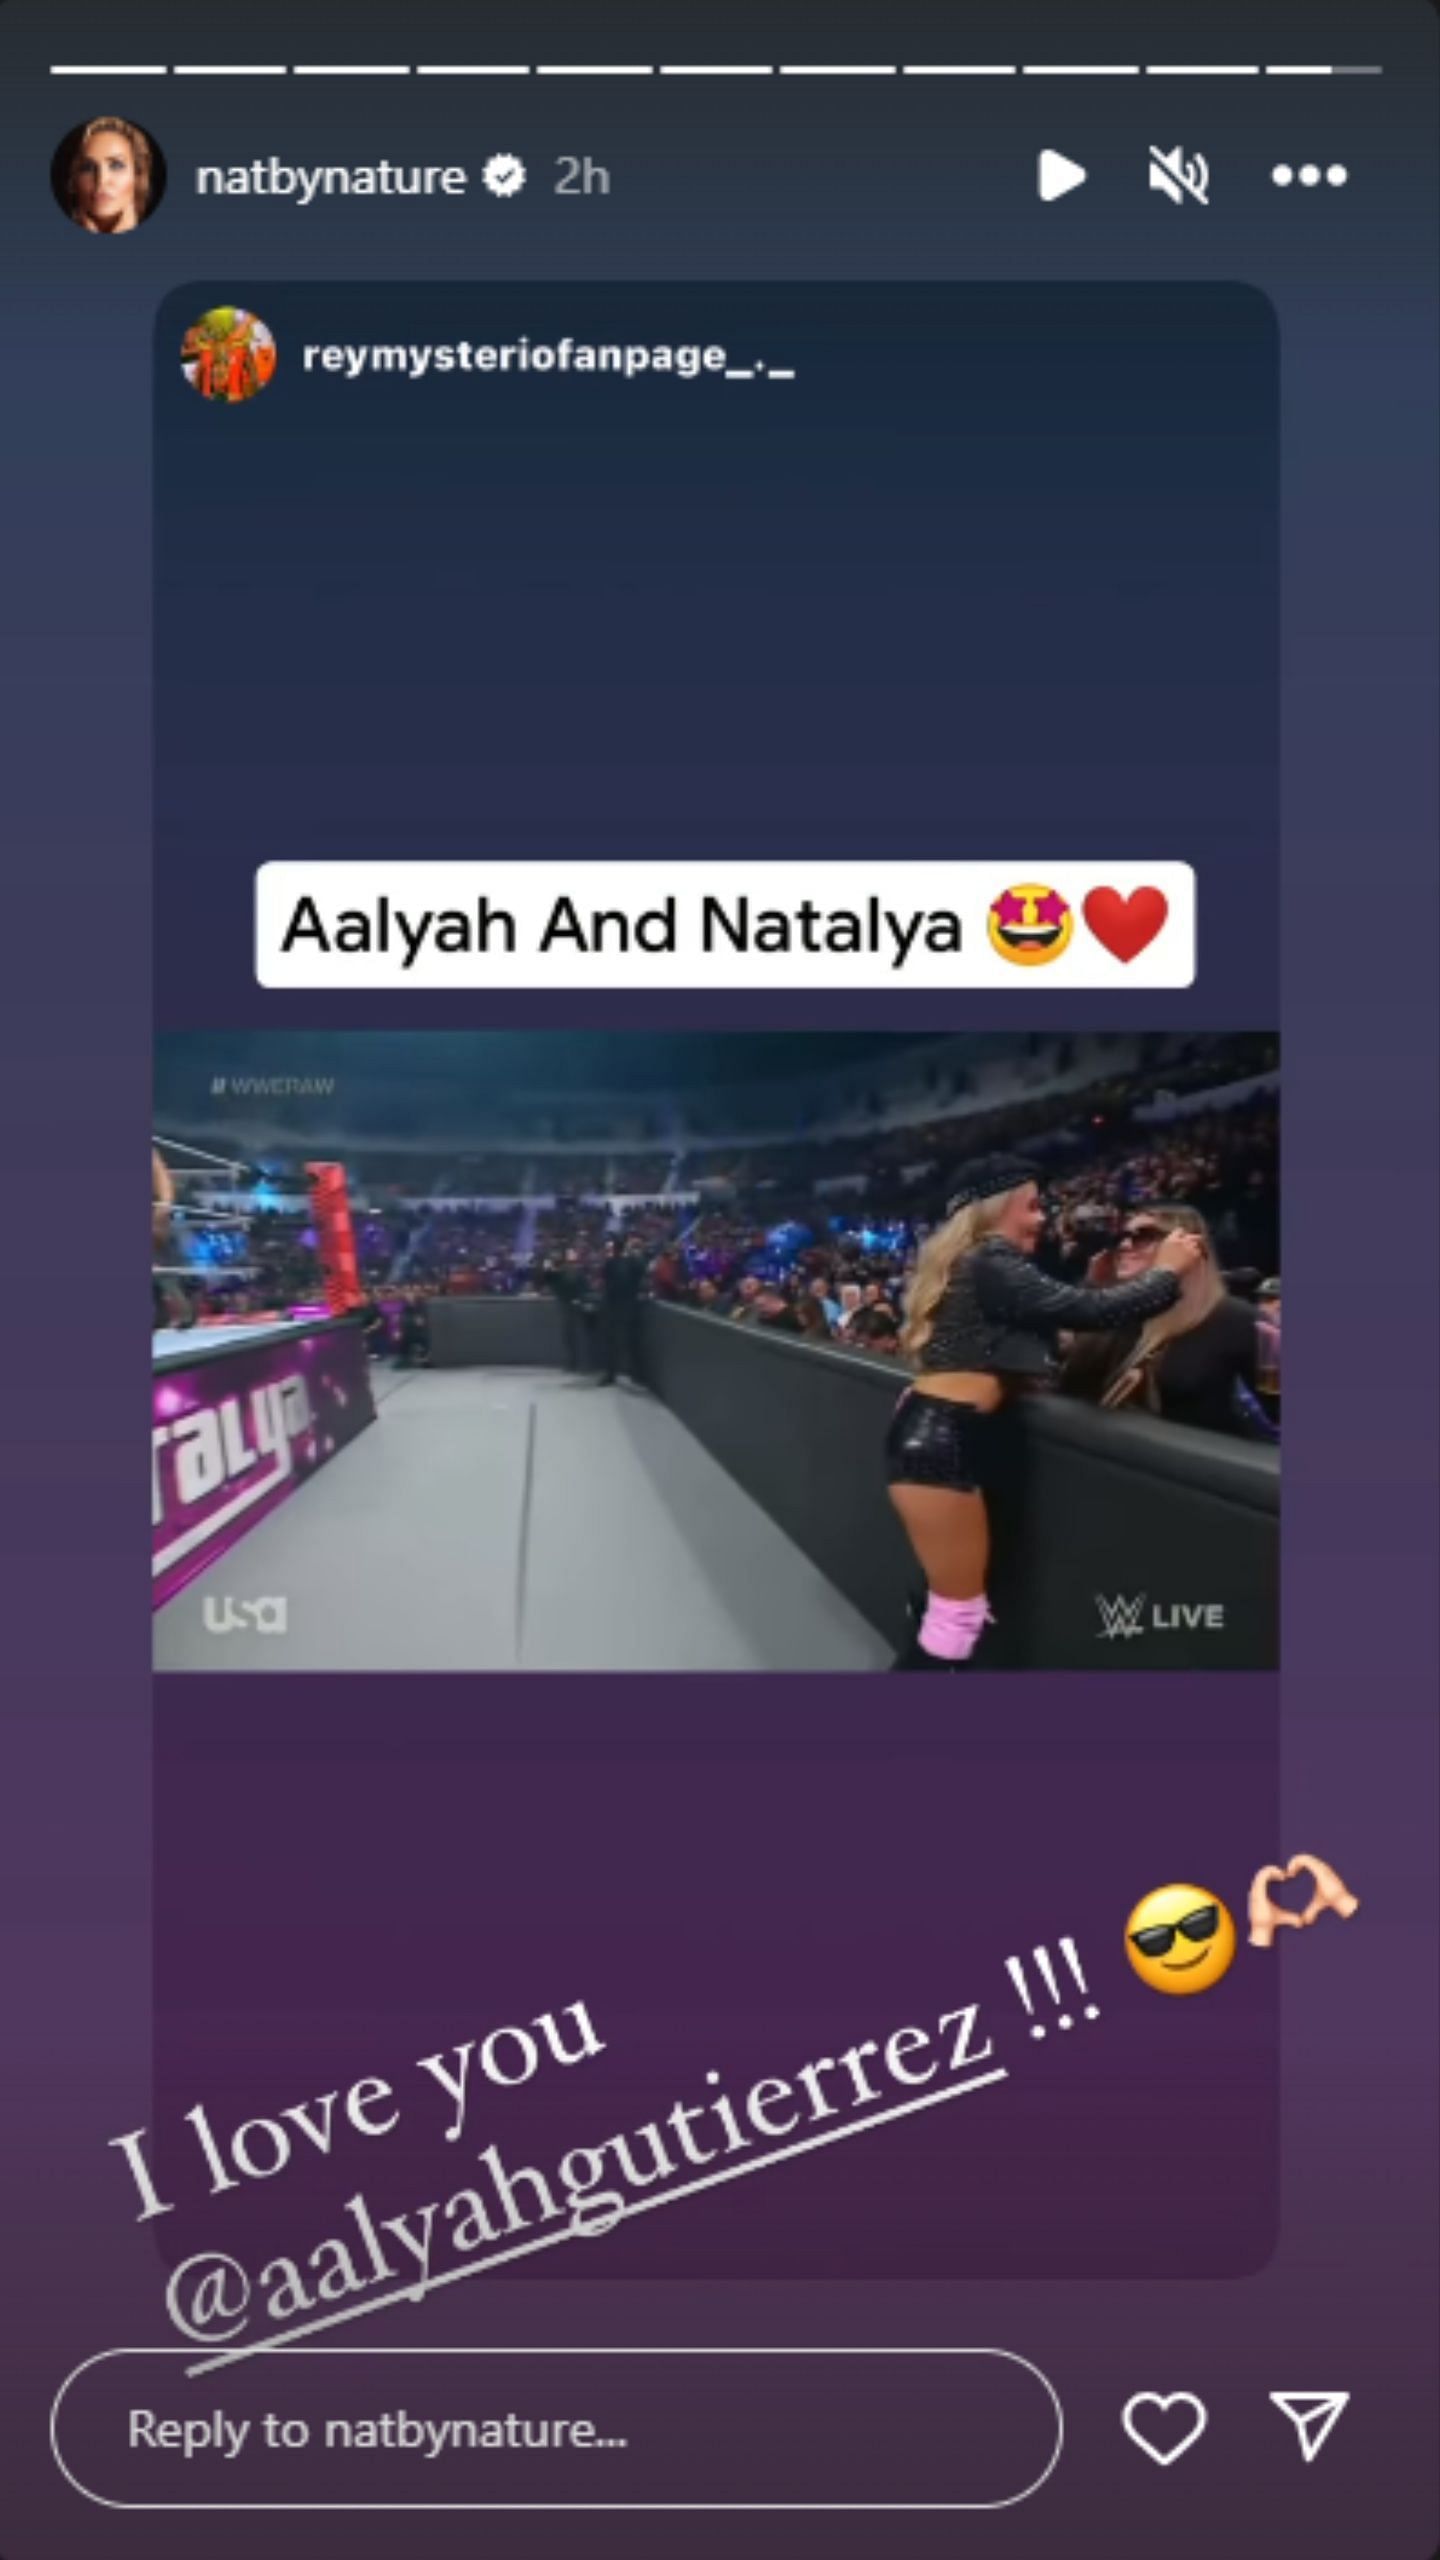 Natalya shared this on her Instagram story.